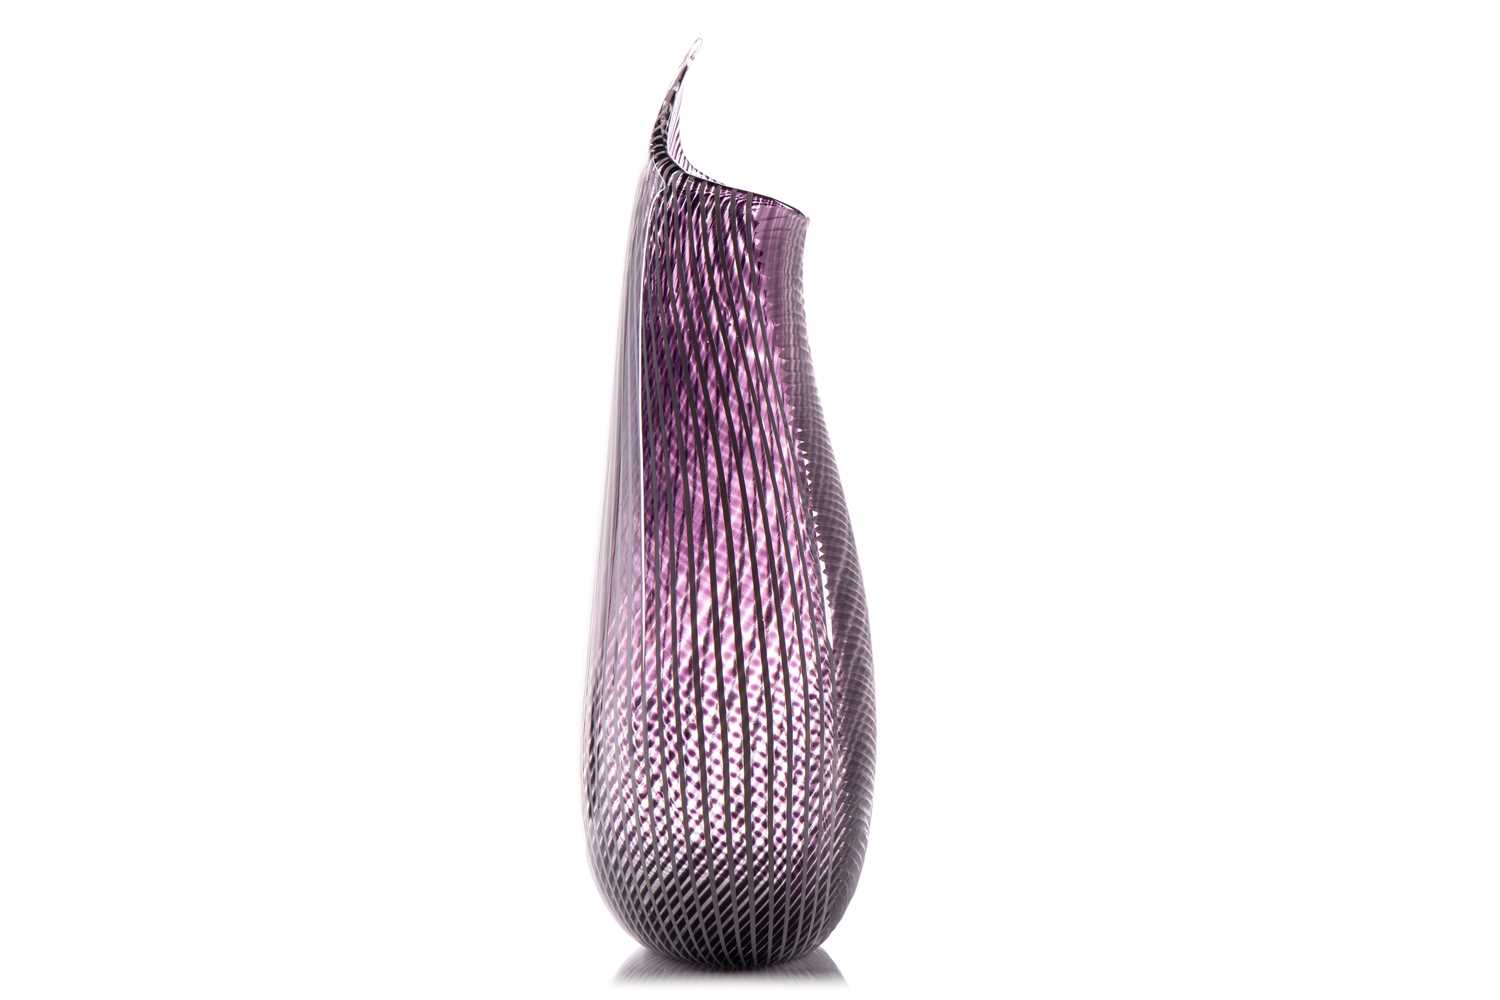 A Luca Vidal Murano large art glass vase with textured finish to one side, bespoke made for the - Image 2 of 9